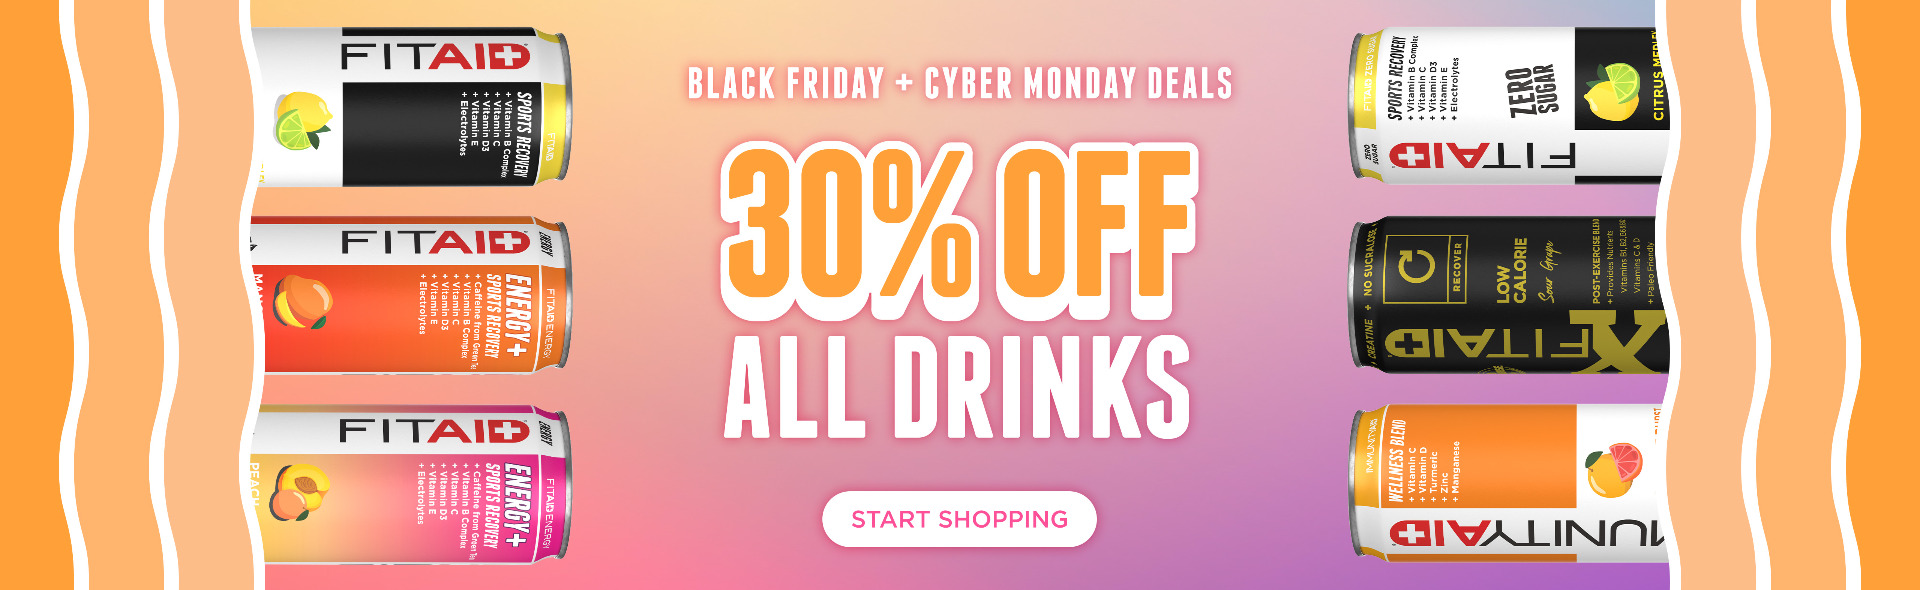 Black Friday + Cyber Monday Deals. 30% off all drinks. Start Shopping.